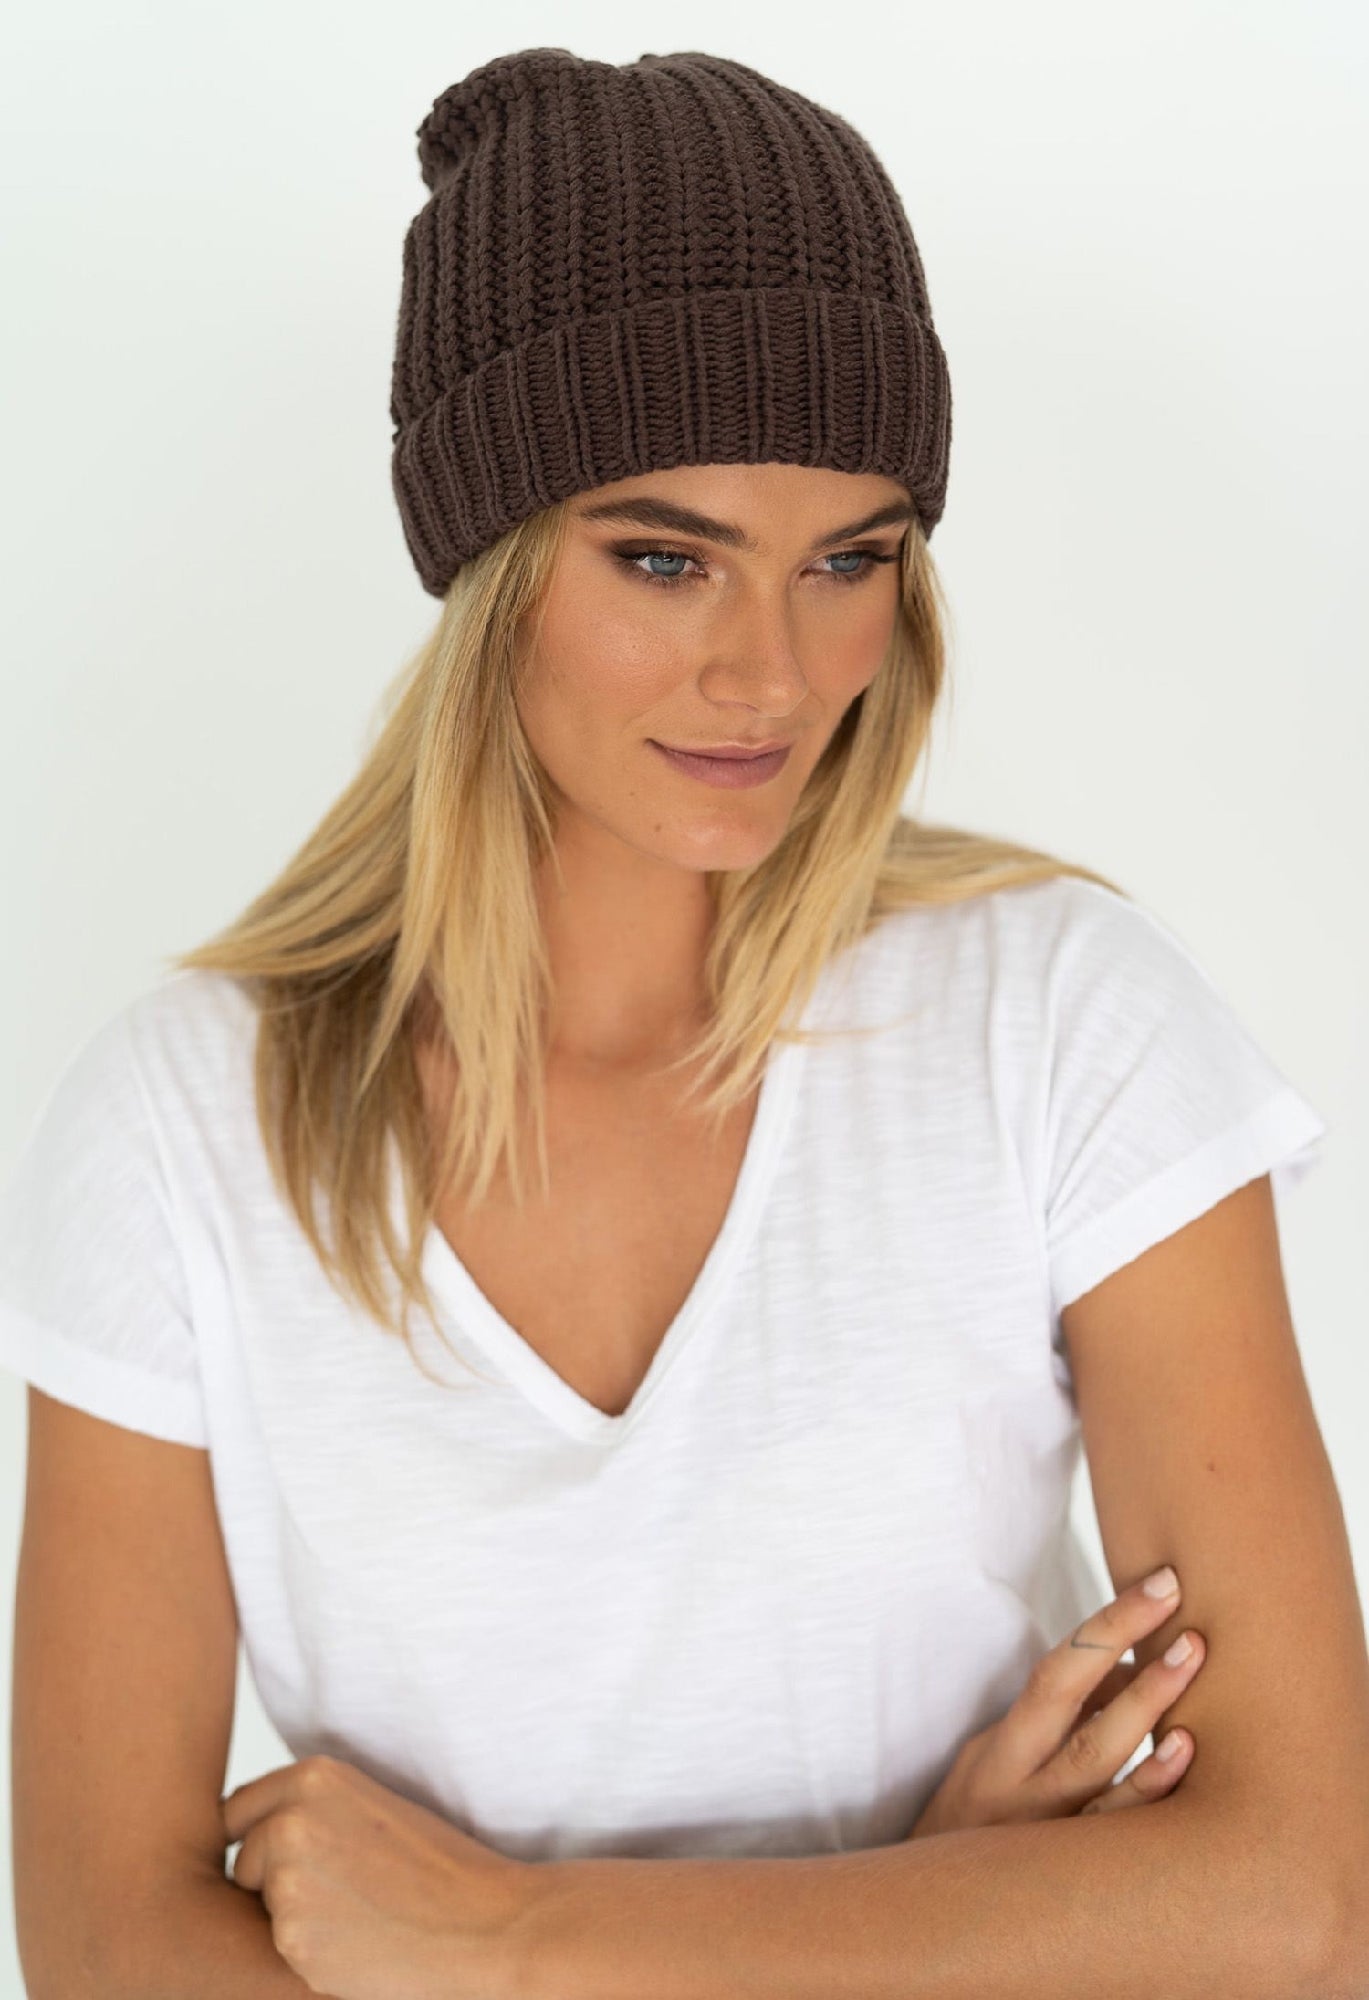 Humidity Keely Beanie [SIZE:O/s  COLOUR:Chocolate]